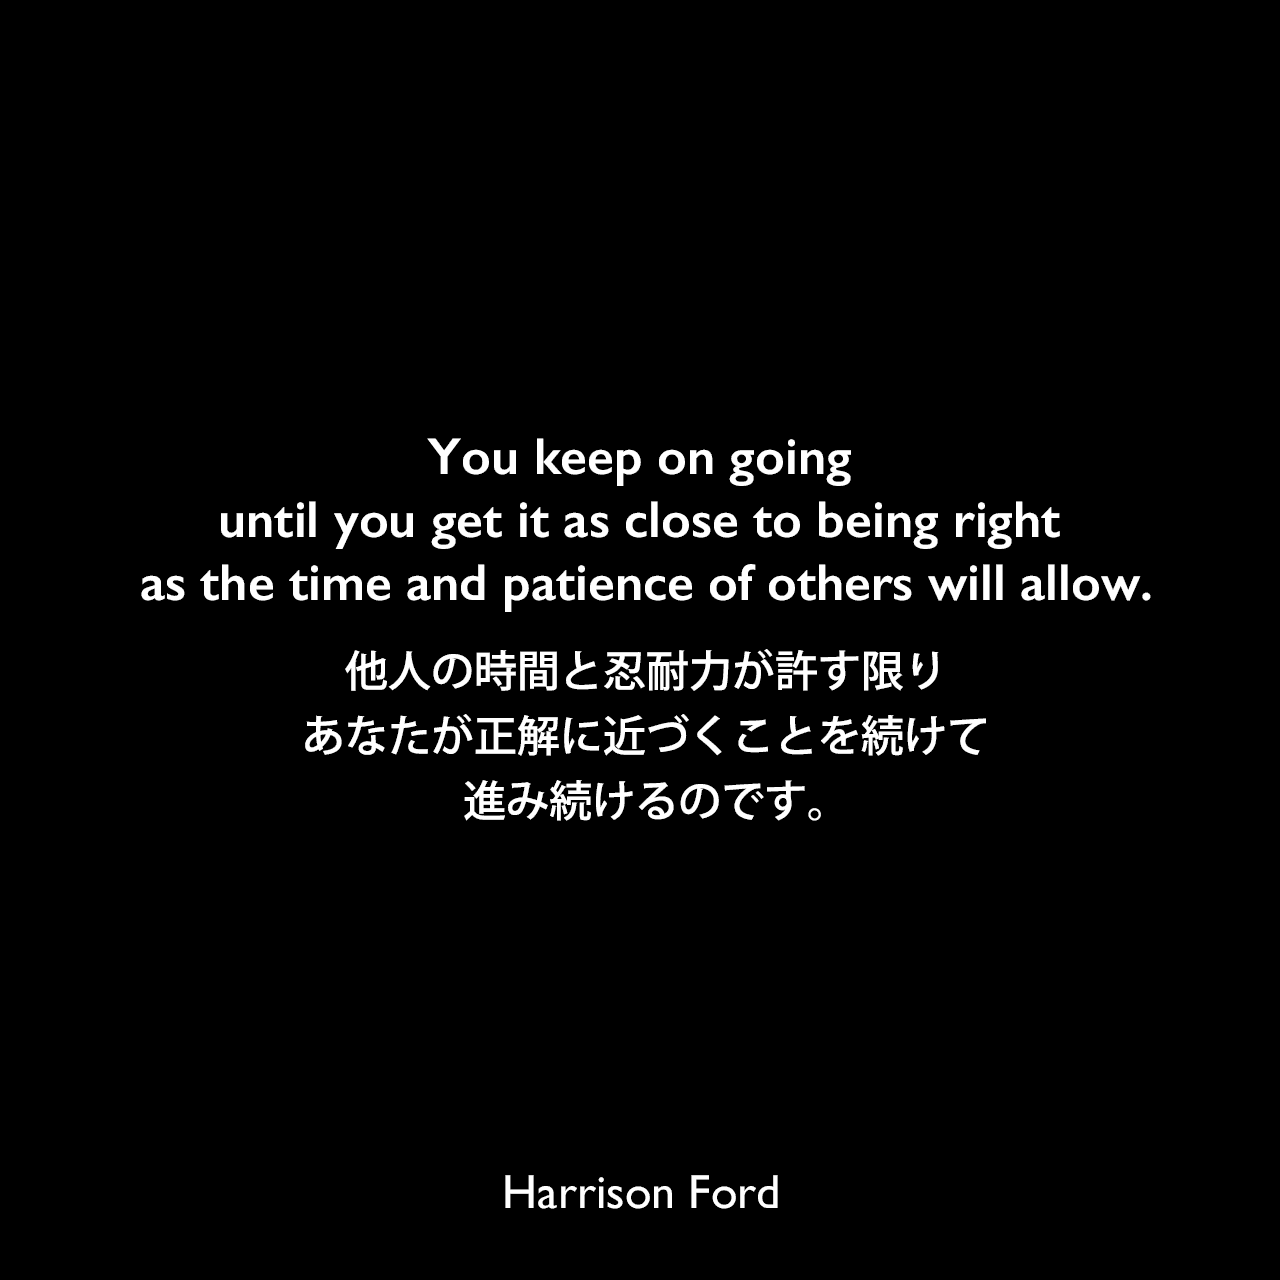 You keep on going until you get it as close to being right as the time and patience of others will allow.他人の時間と忍耐力が許す限り、あなたが正解に近づくことを続けて進み続けるのです。Harrison Ford